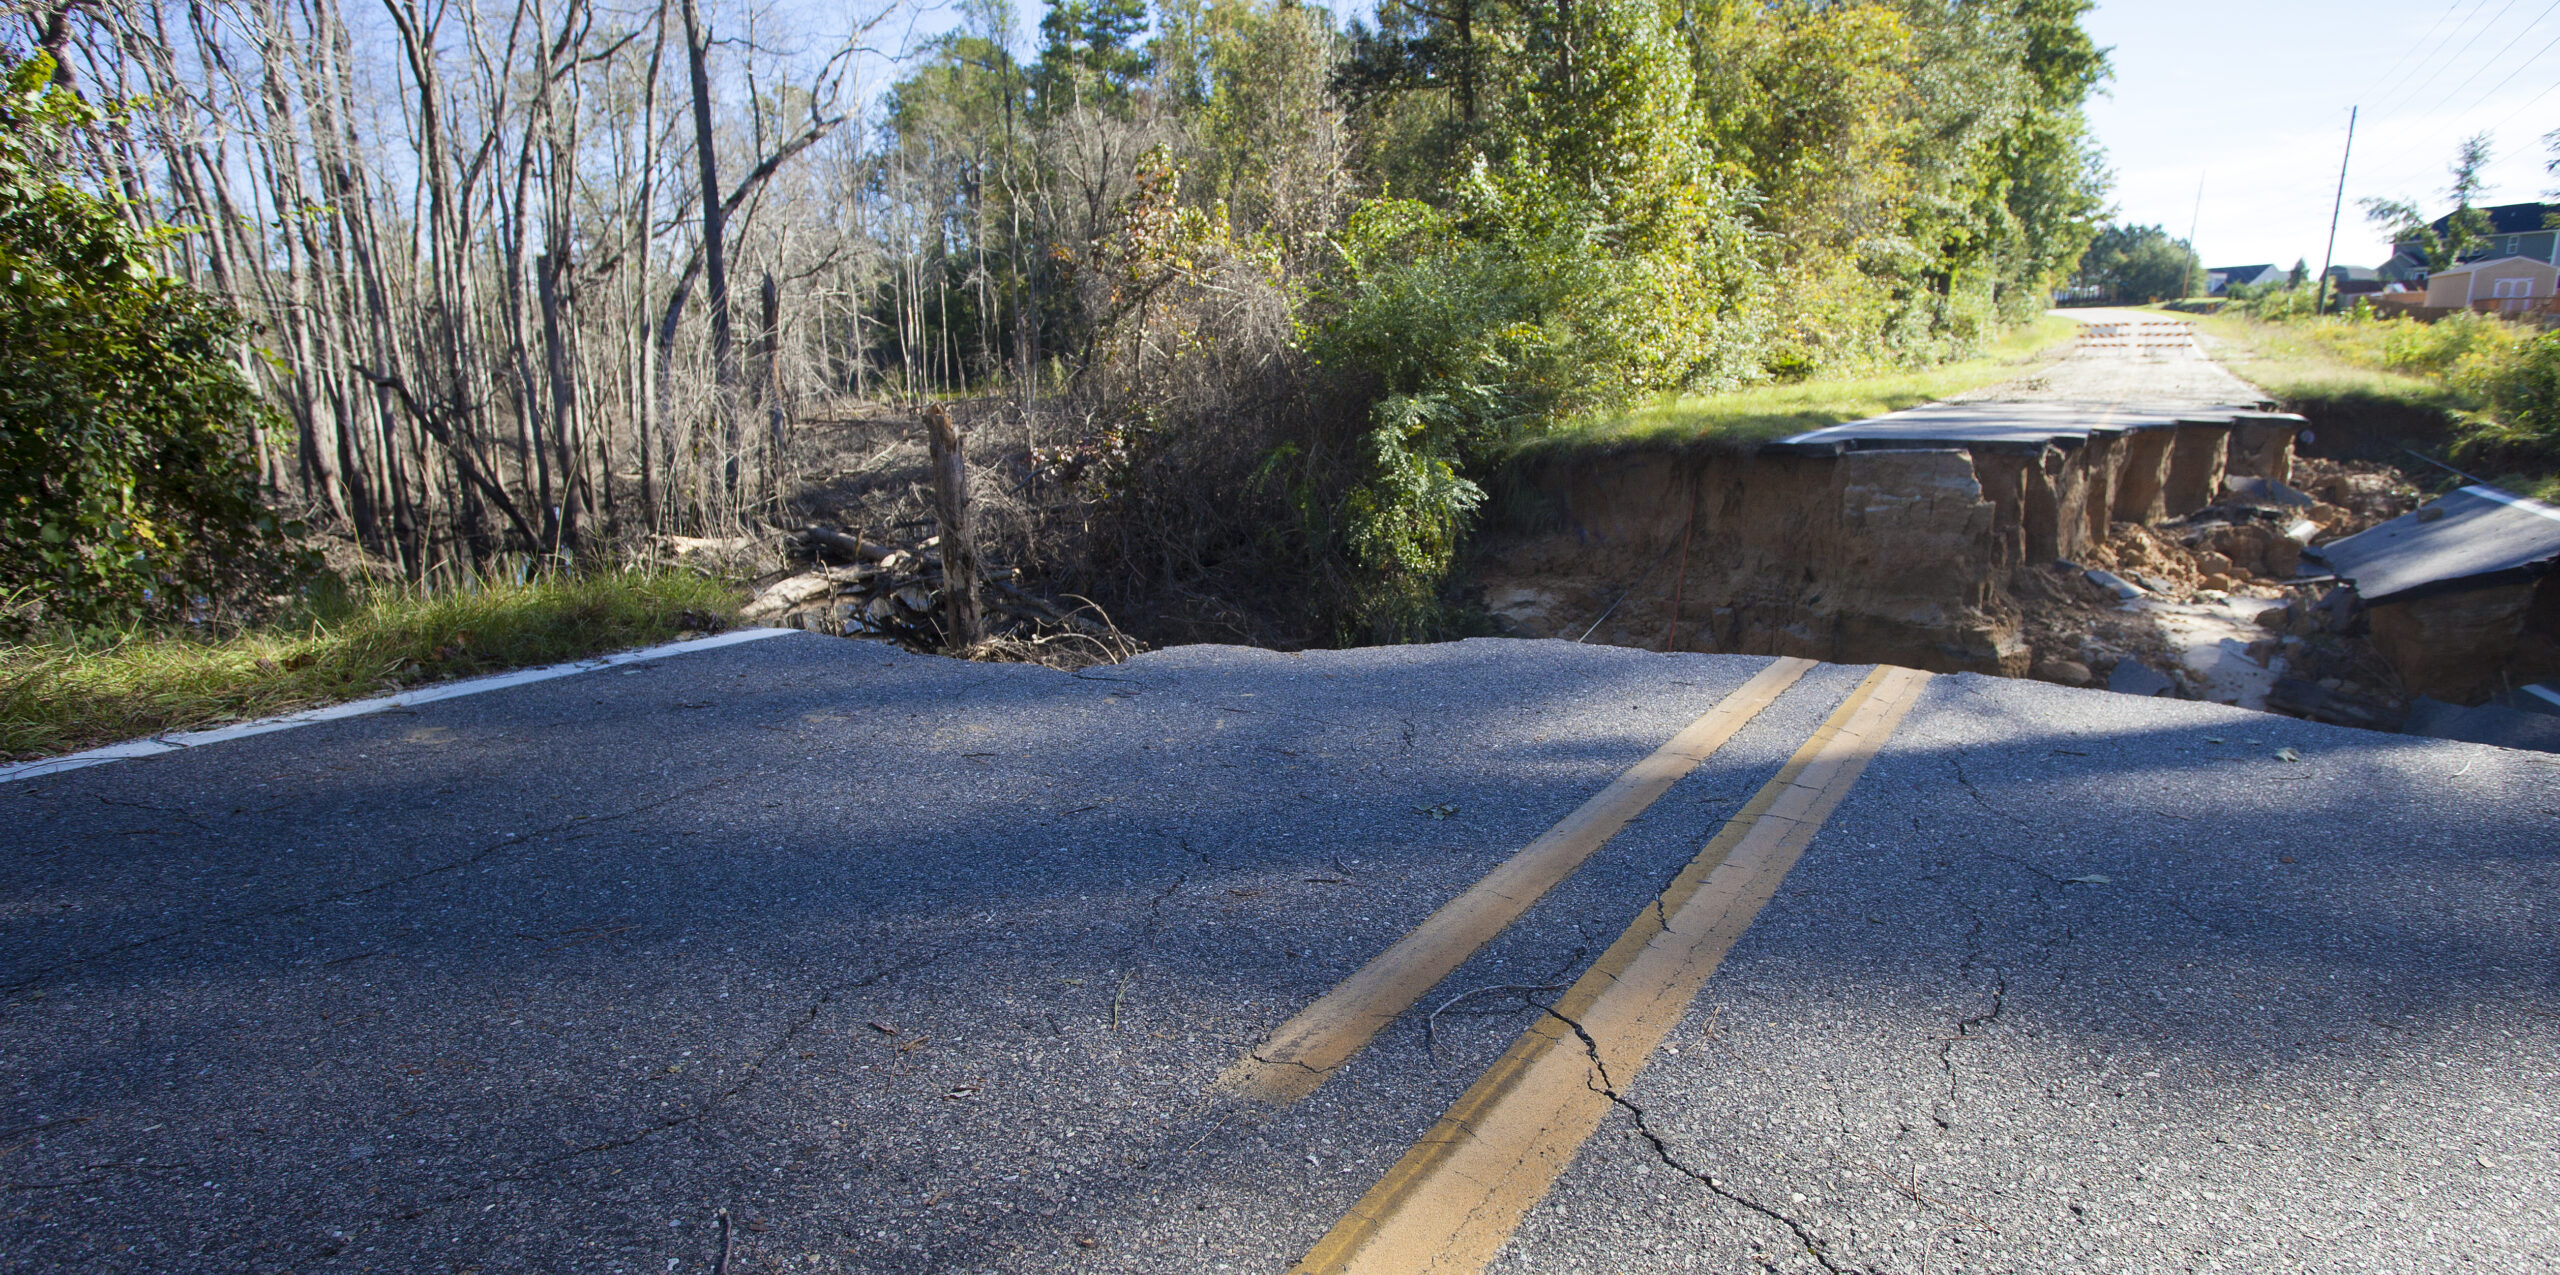 Roadway that has disappeared near Fayetteville North Carolina after Hurricane Matthew